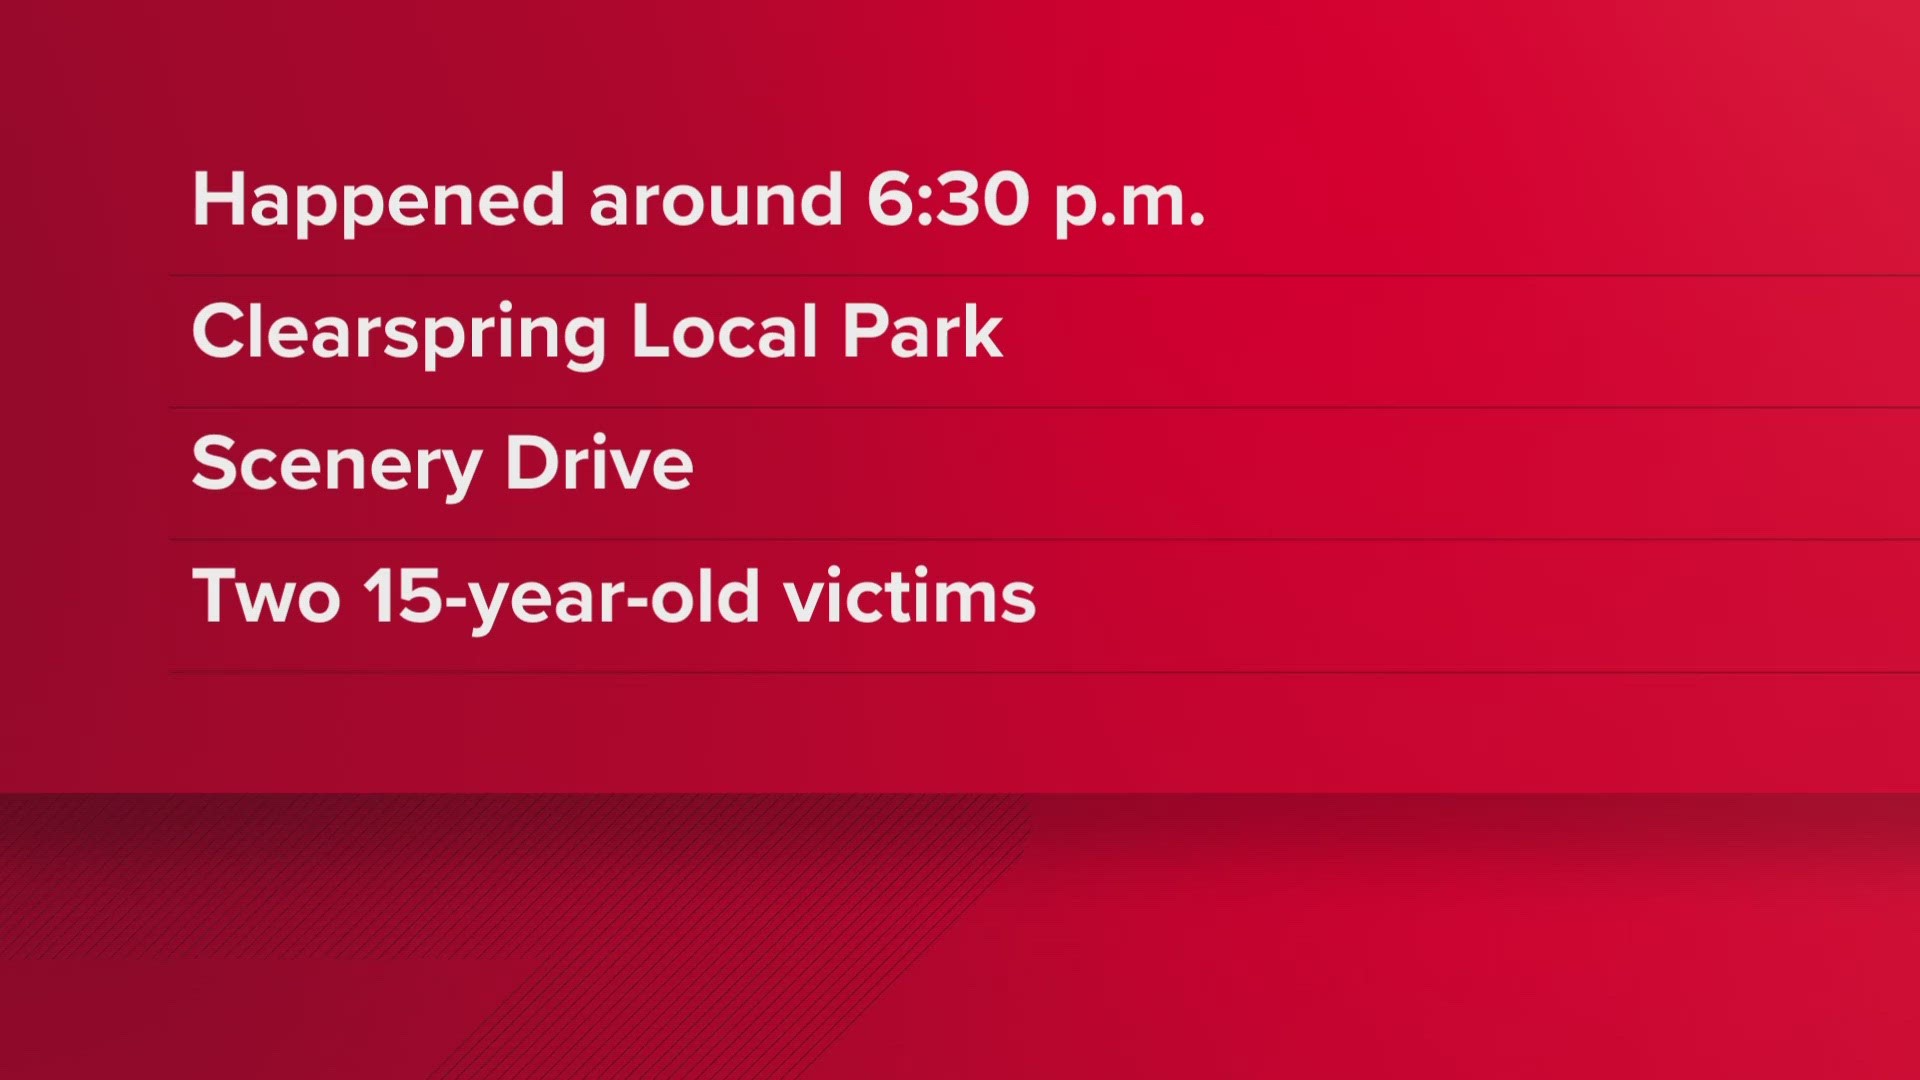 Police said the two teens were attending a birthday party at Clearspring Local Park.